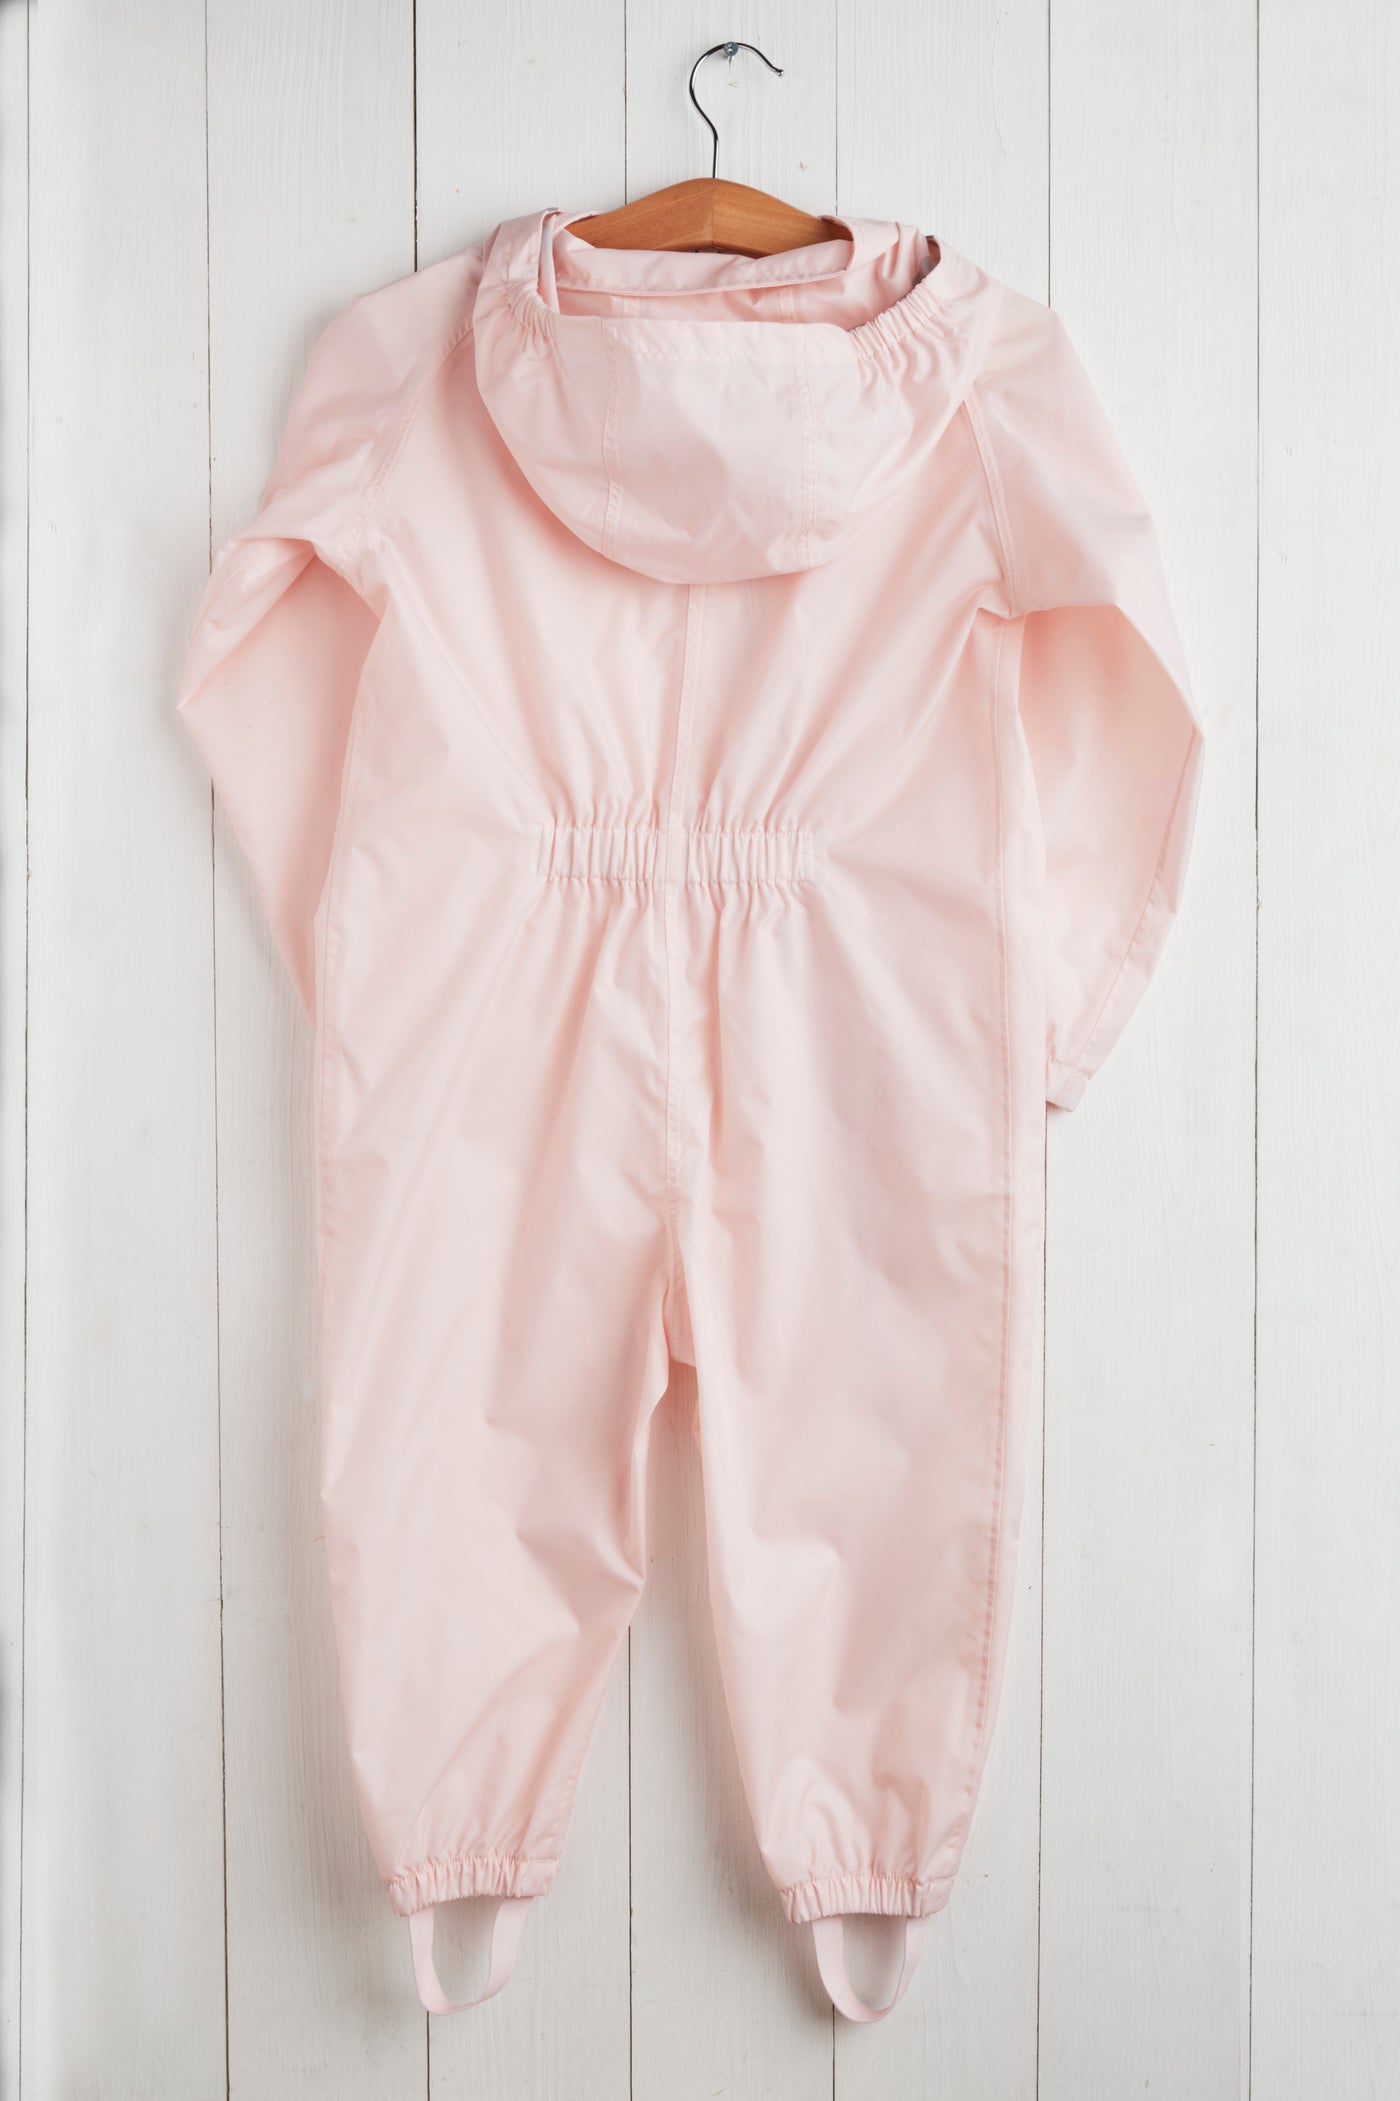 GRASS & AIR - Toddler Puddlesuit in Baby Pink